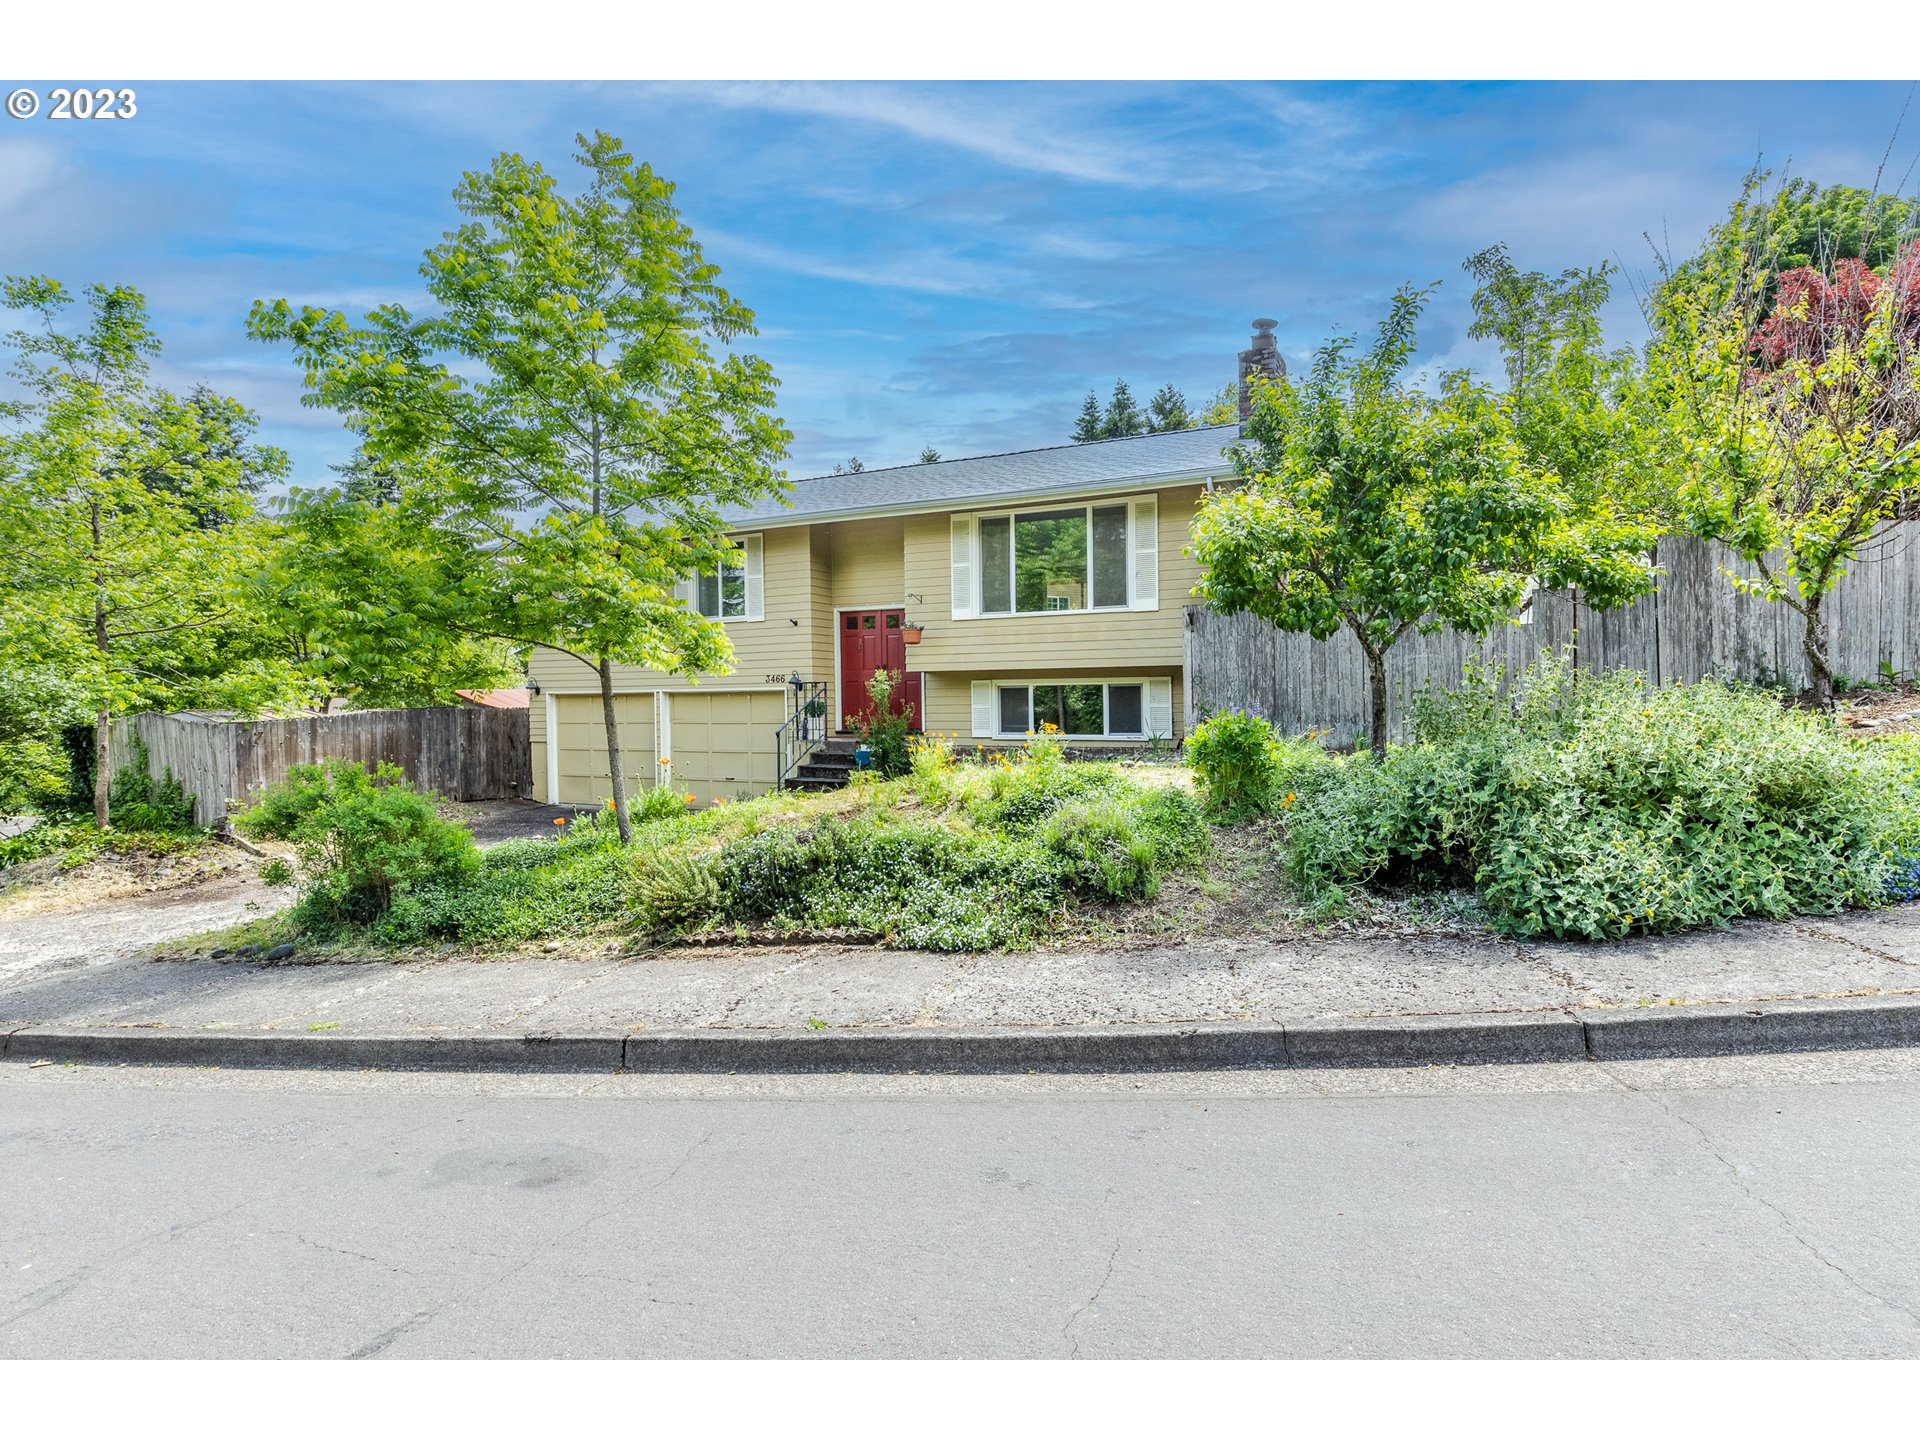 3466 CHAUCER WAY, Eugene, OR 97405